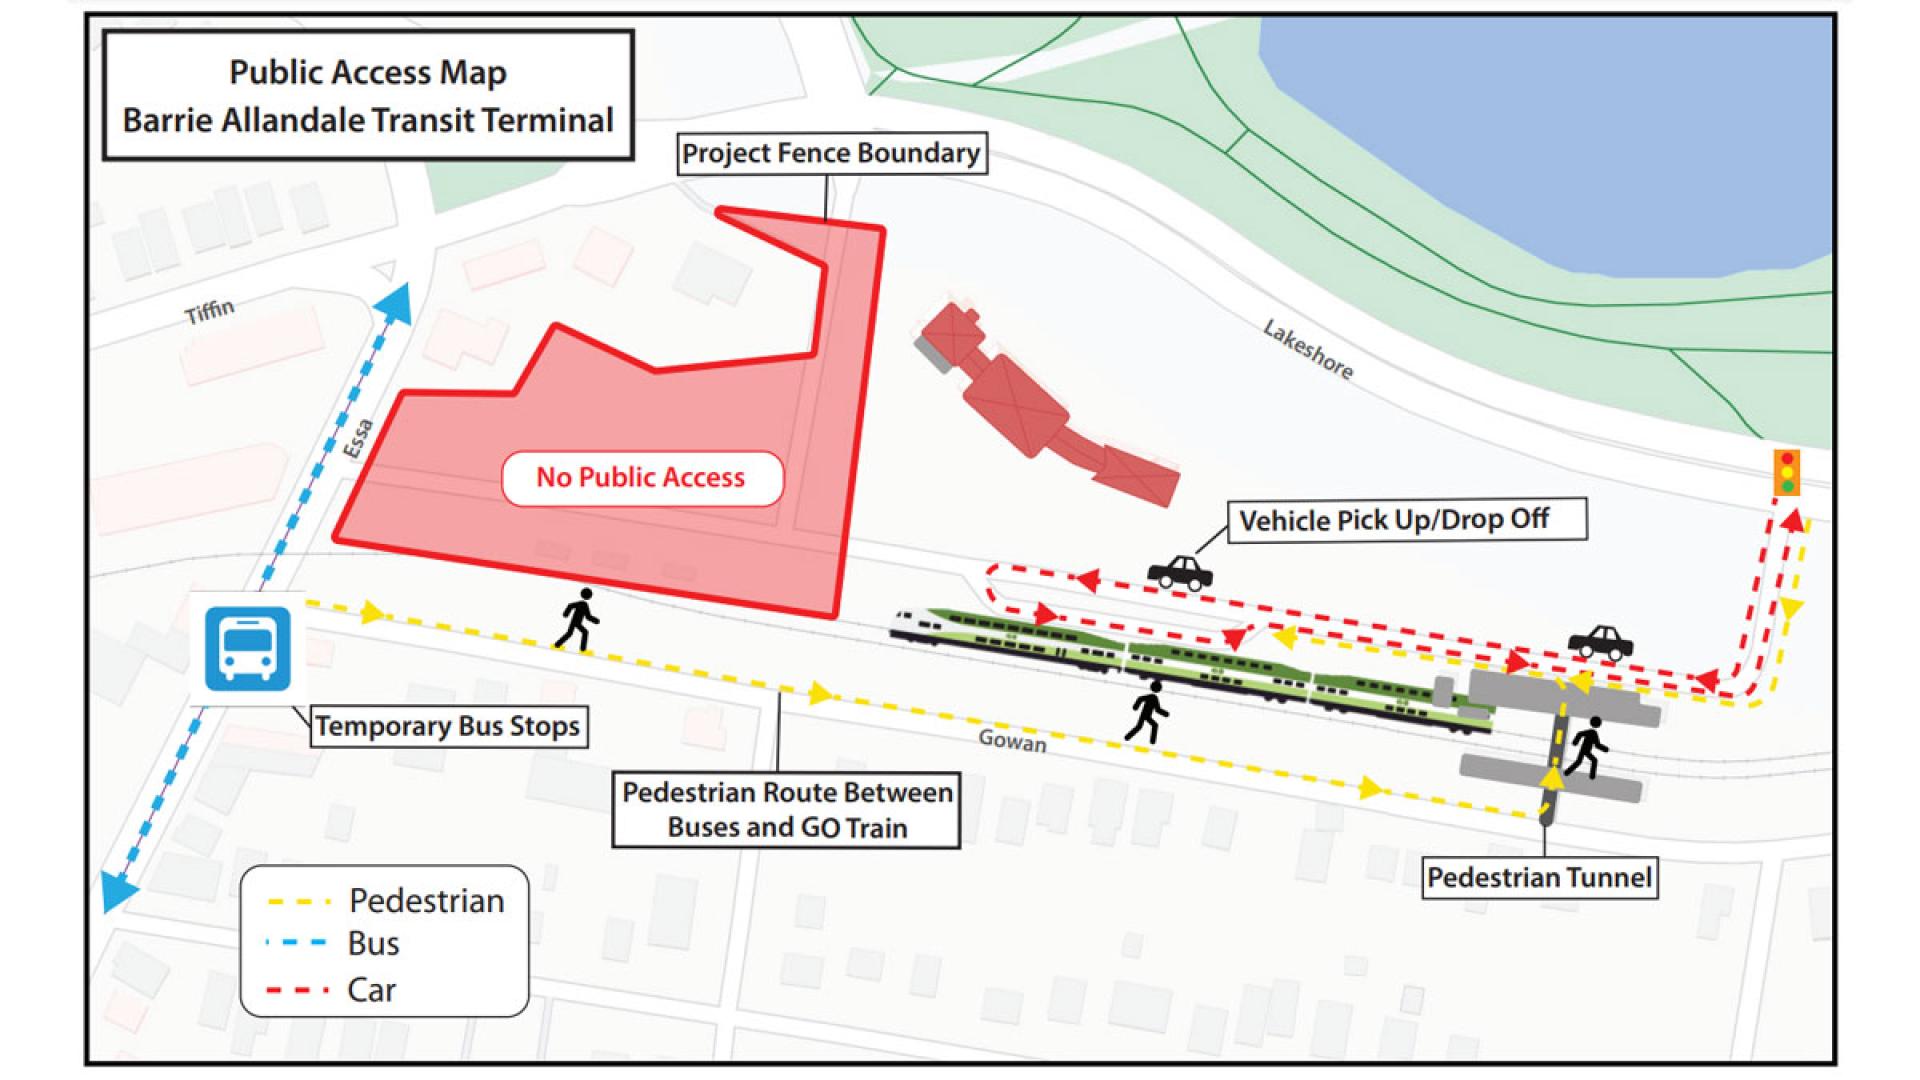 Map outlining the construction impacts at the Barrie Allandale Transit Terminal